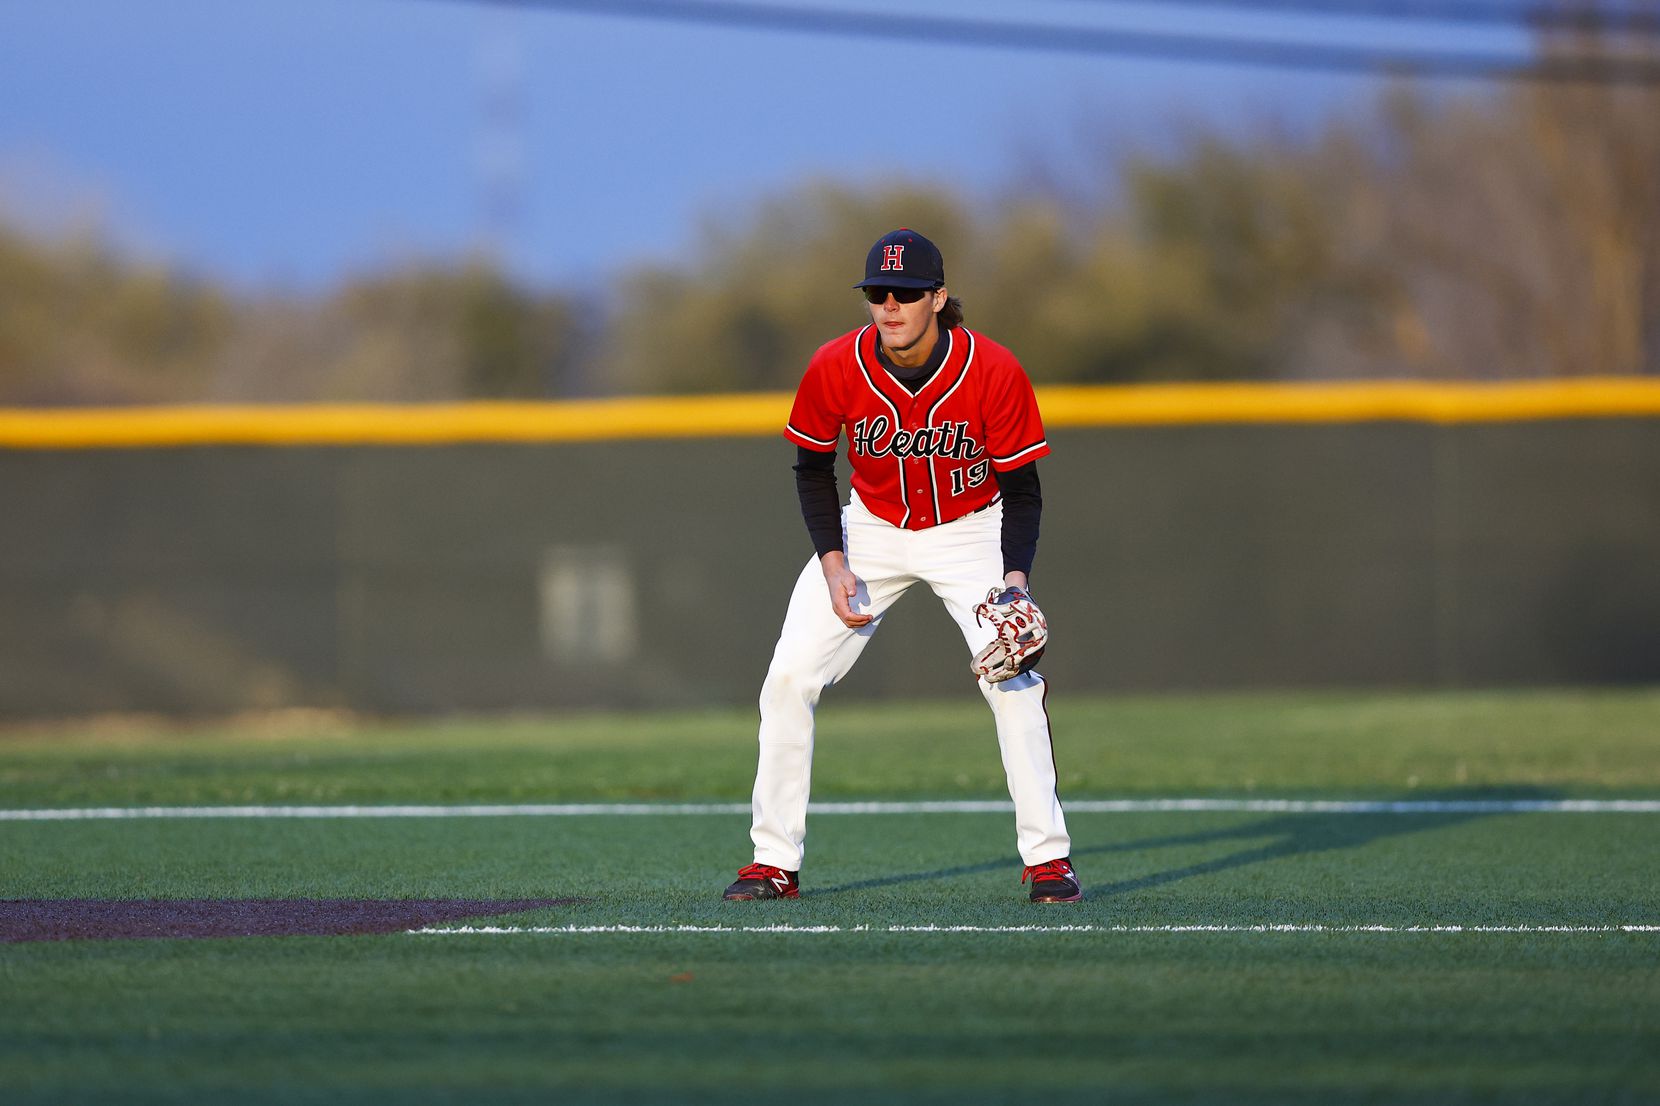 Rockwall-Heath third baseman Jonny Lowe stands ready for a hit during a district 10-6A high...